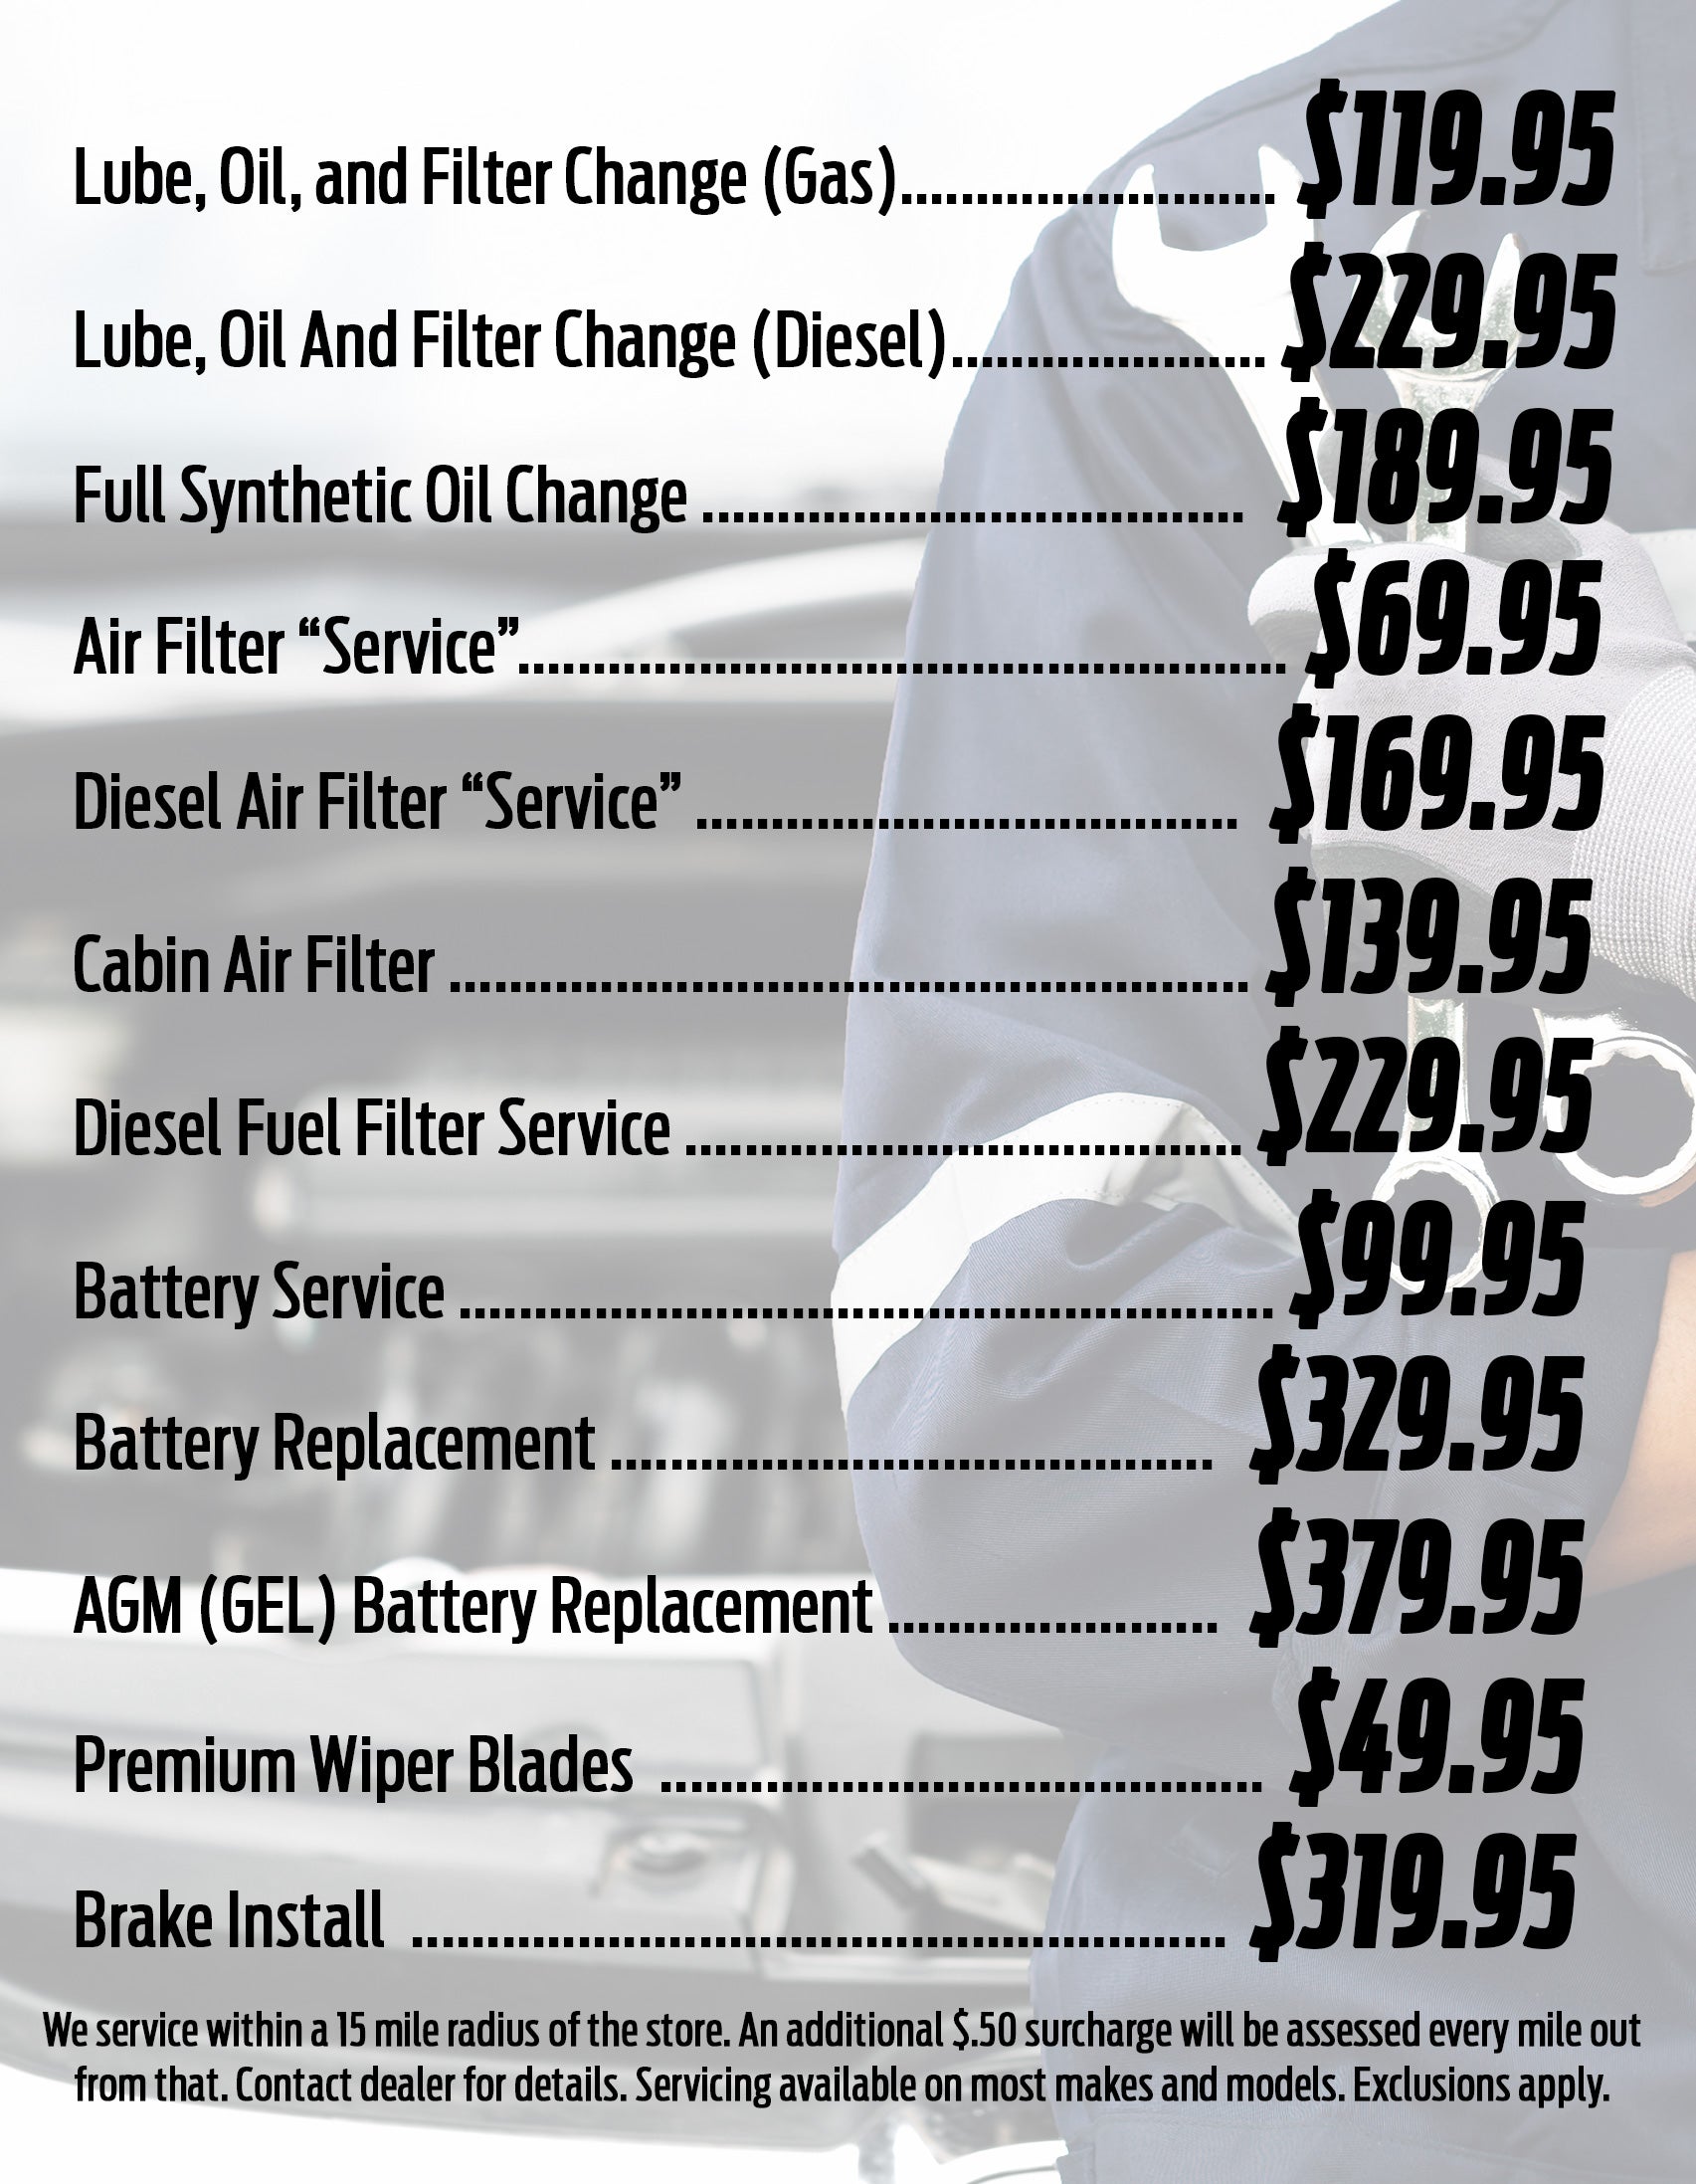 Ford Mobile Service - Pricing